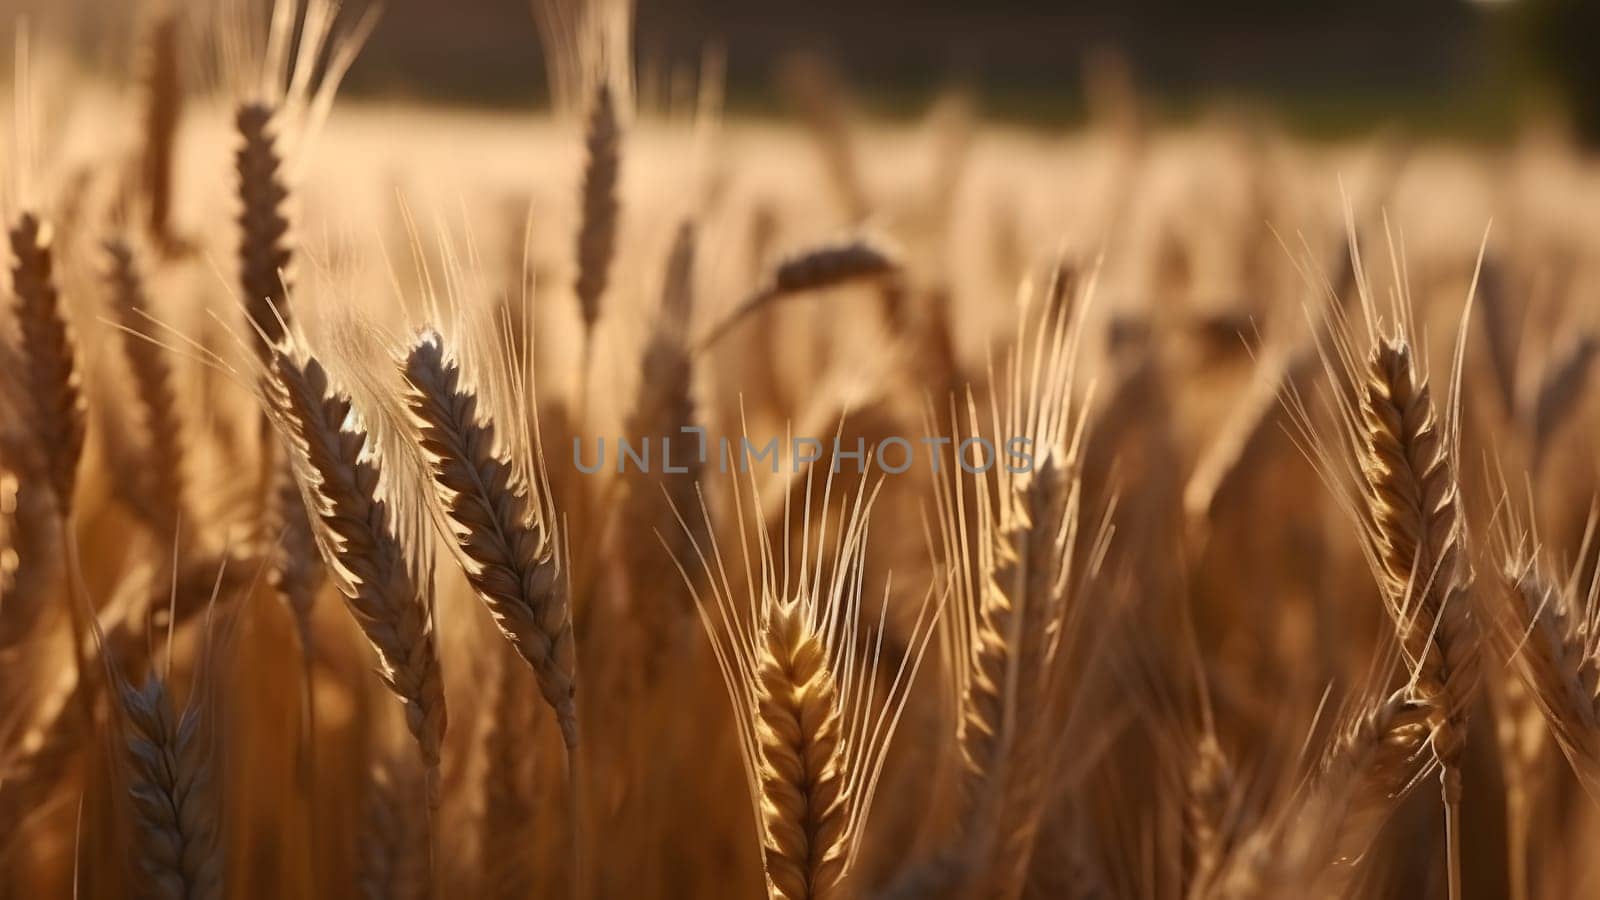 Spikes of ripe wheat at sunny day, close-up with selective focus, neural network generated image by z1b